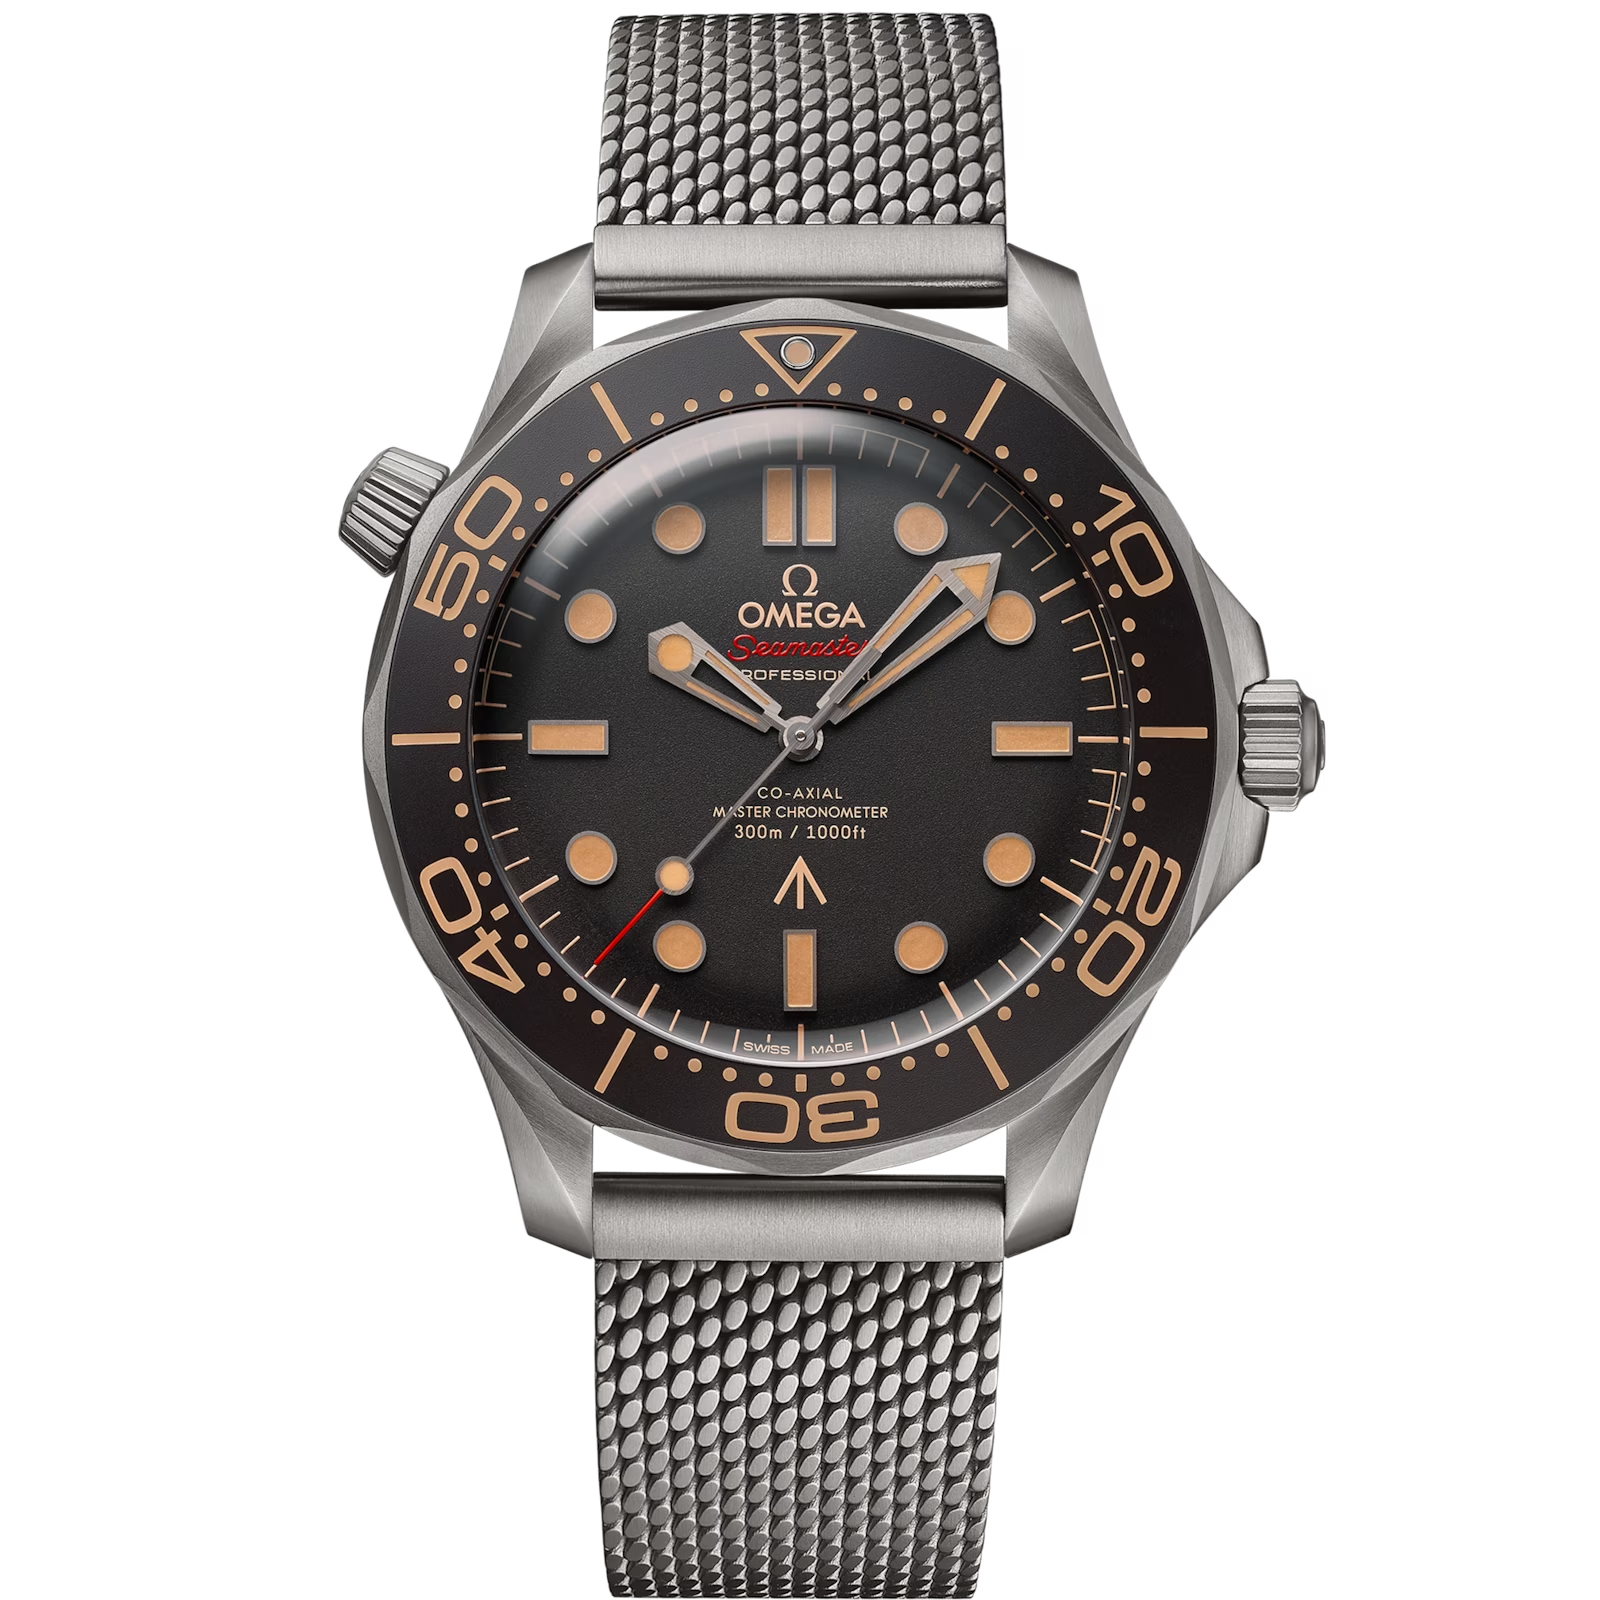 OMEGA-SEAMASTER DIVER 300M CO‑AXIAL MASTER CHRONOMETER 42 MM 210.90.42.20.01.001